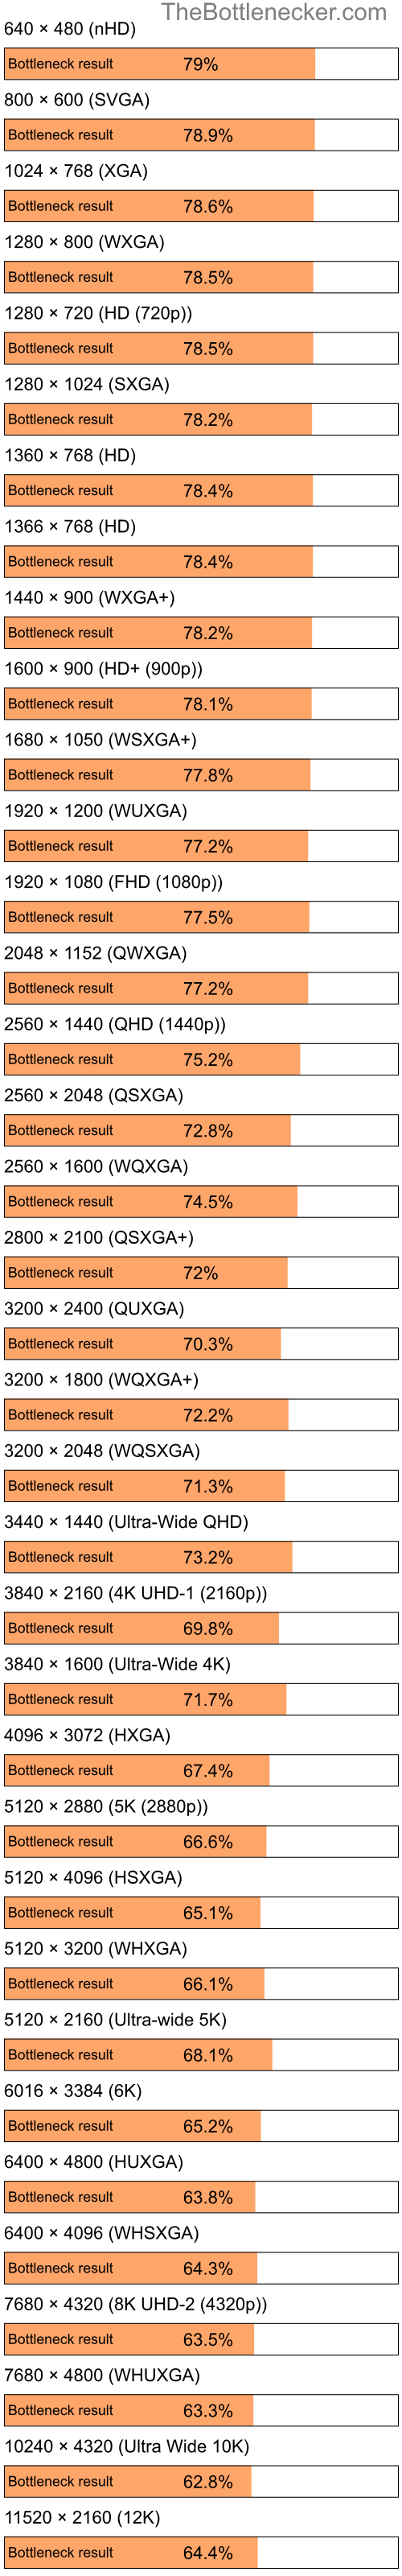 Bottleneck results by resolution for Intel Pentium 4 and NVIDIA GeForce GTX 1070 in Graphic Card Intense Tasks